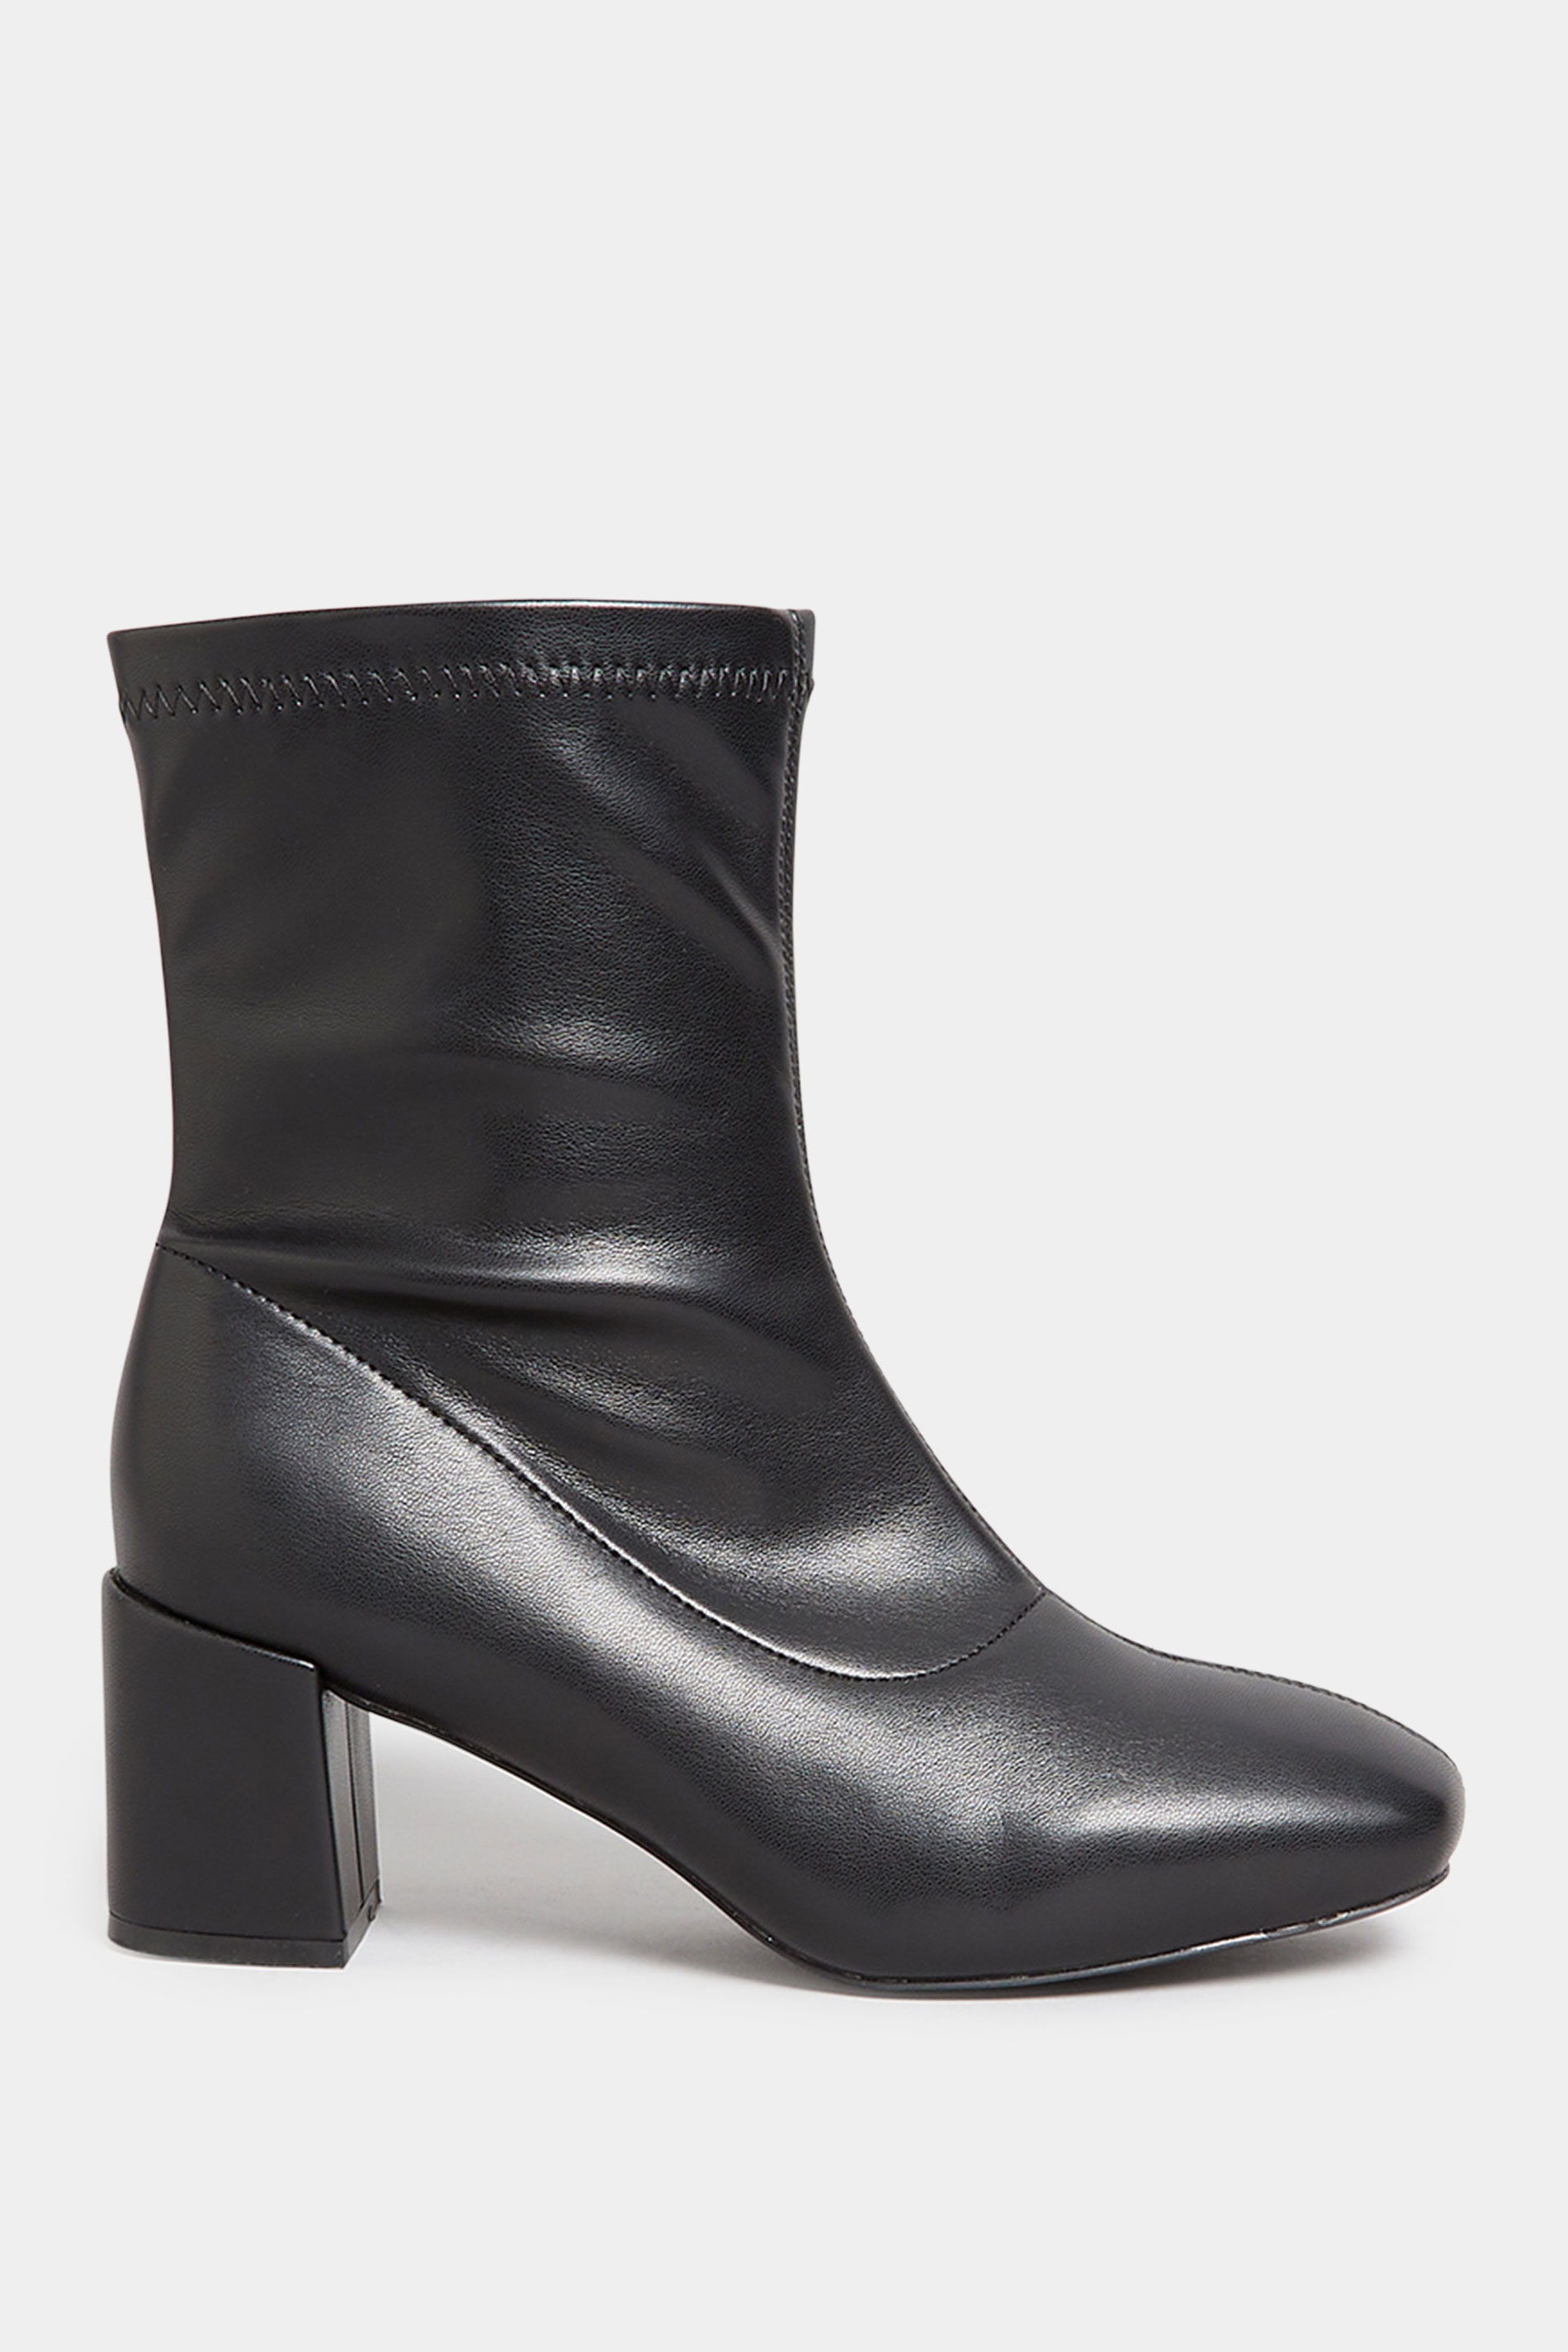 Black Square Toe Heeled Boots In Wide E Fit & Extra Wide EEE Fit | Yours Clothing 3